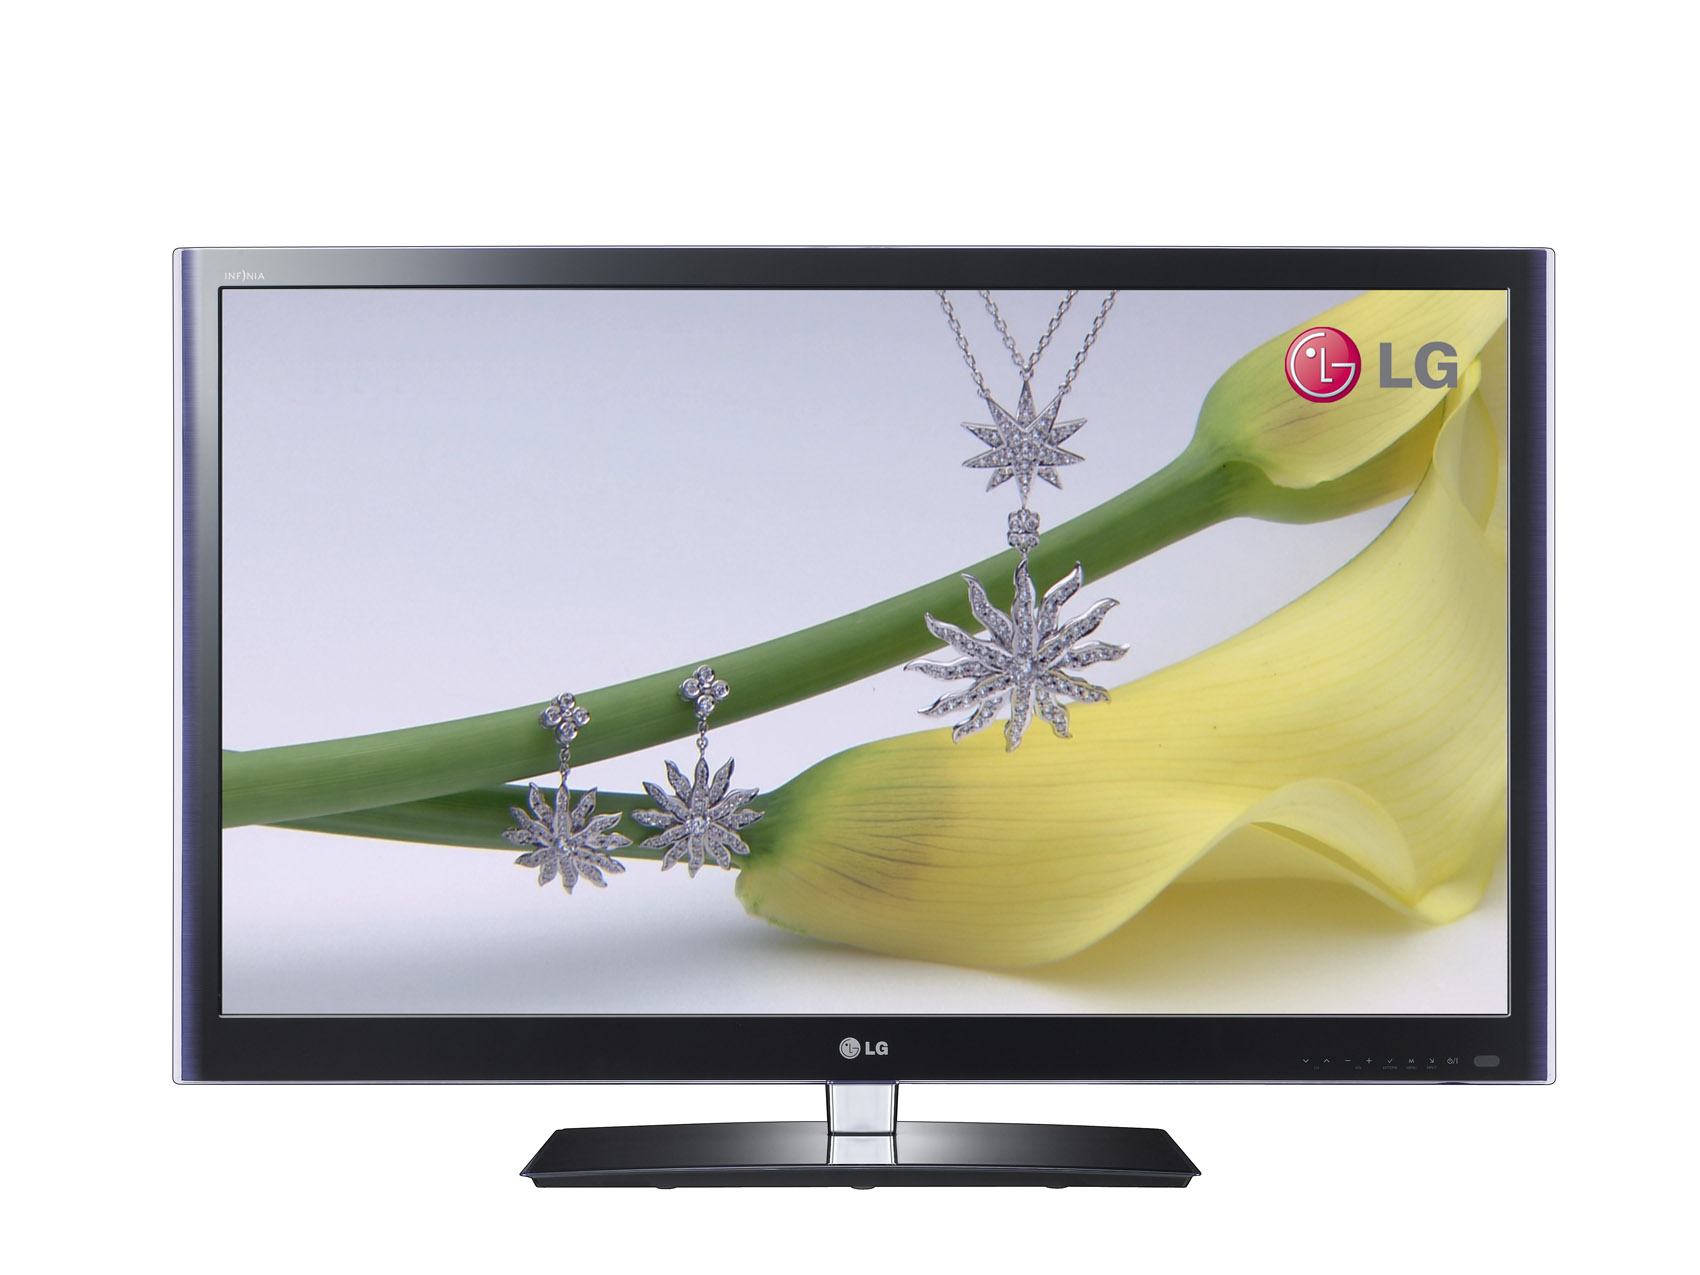 Front view of the LG CINEMA 3D TV